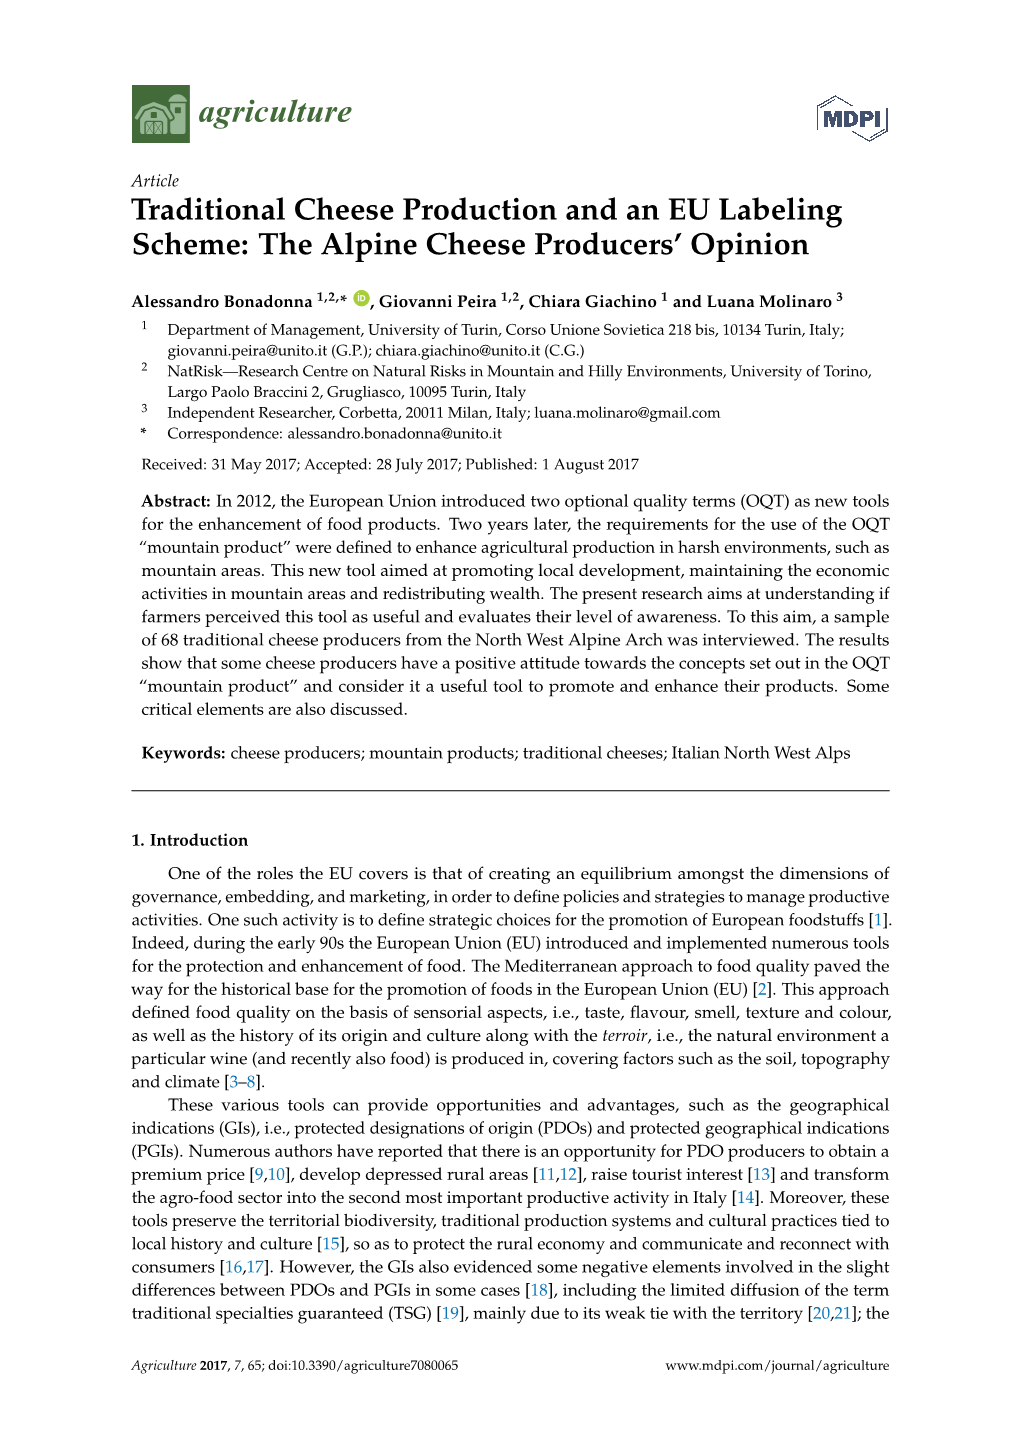 Traditional Cheese Production and an EU Labeling Scheme: the Alpine Cheese Producers' Opinion